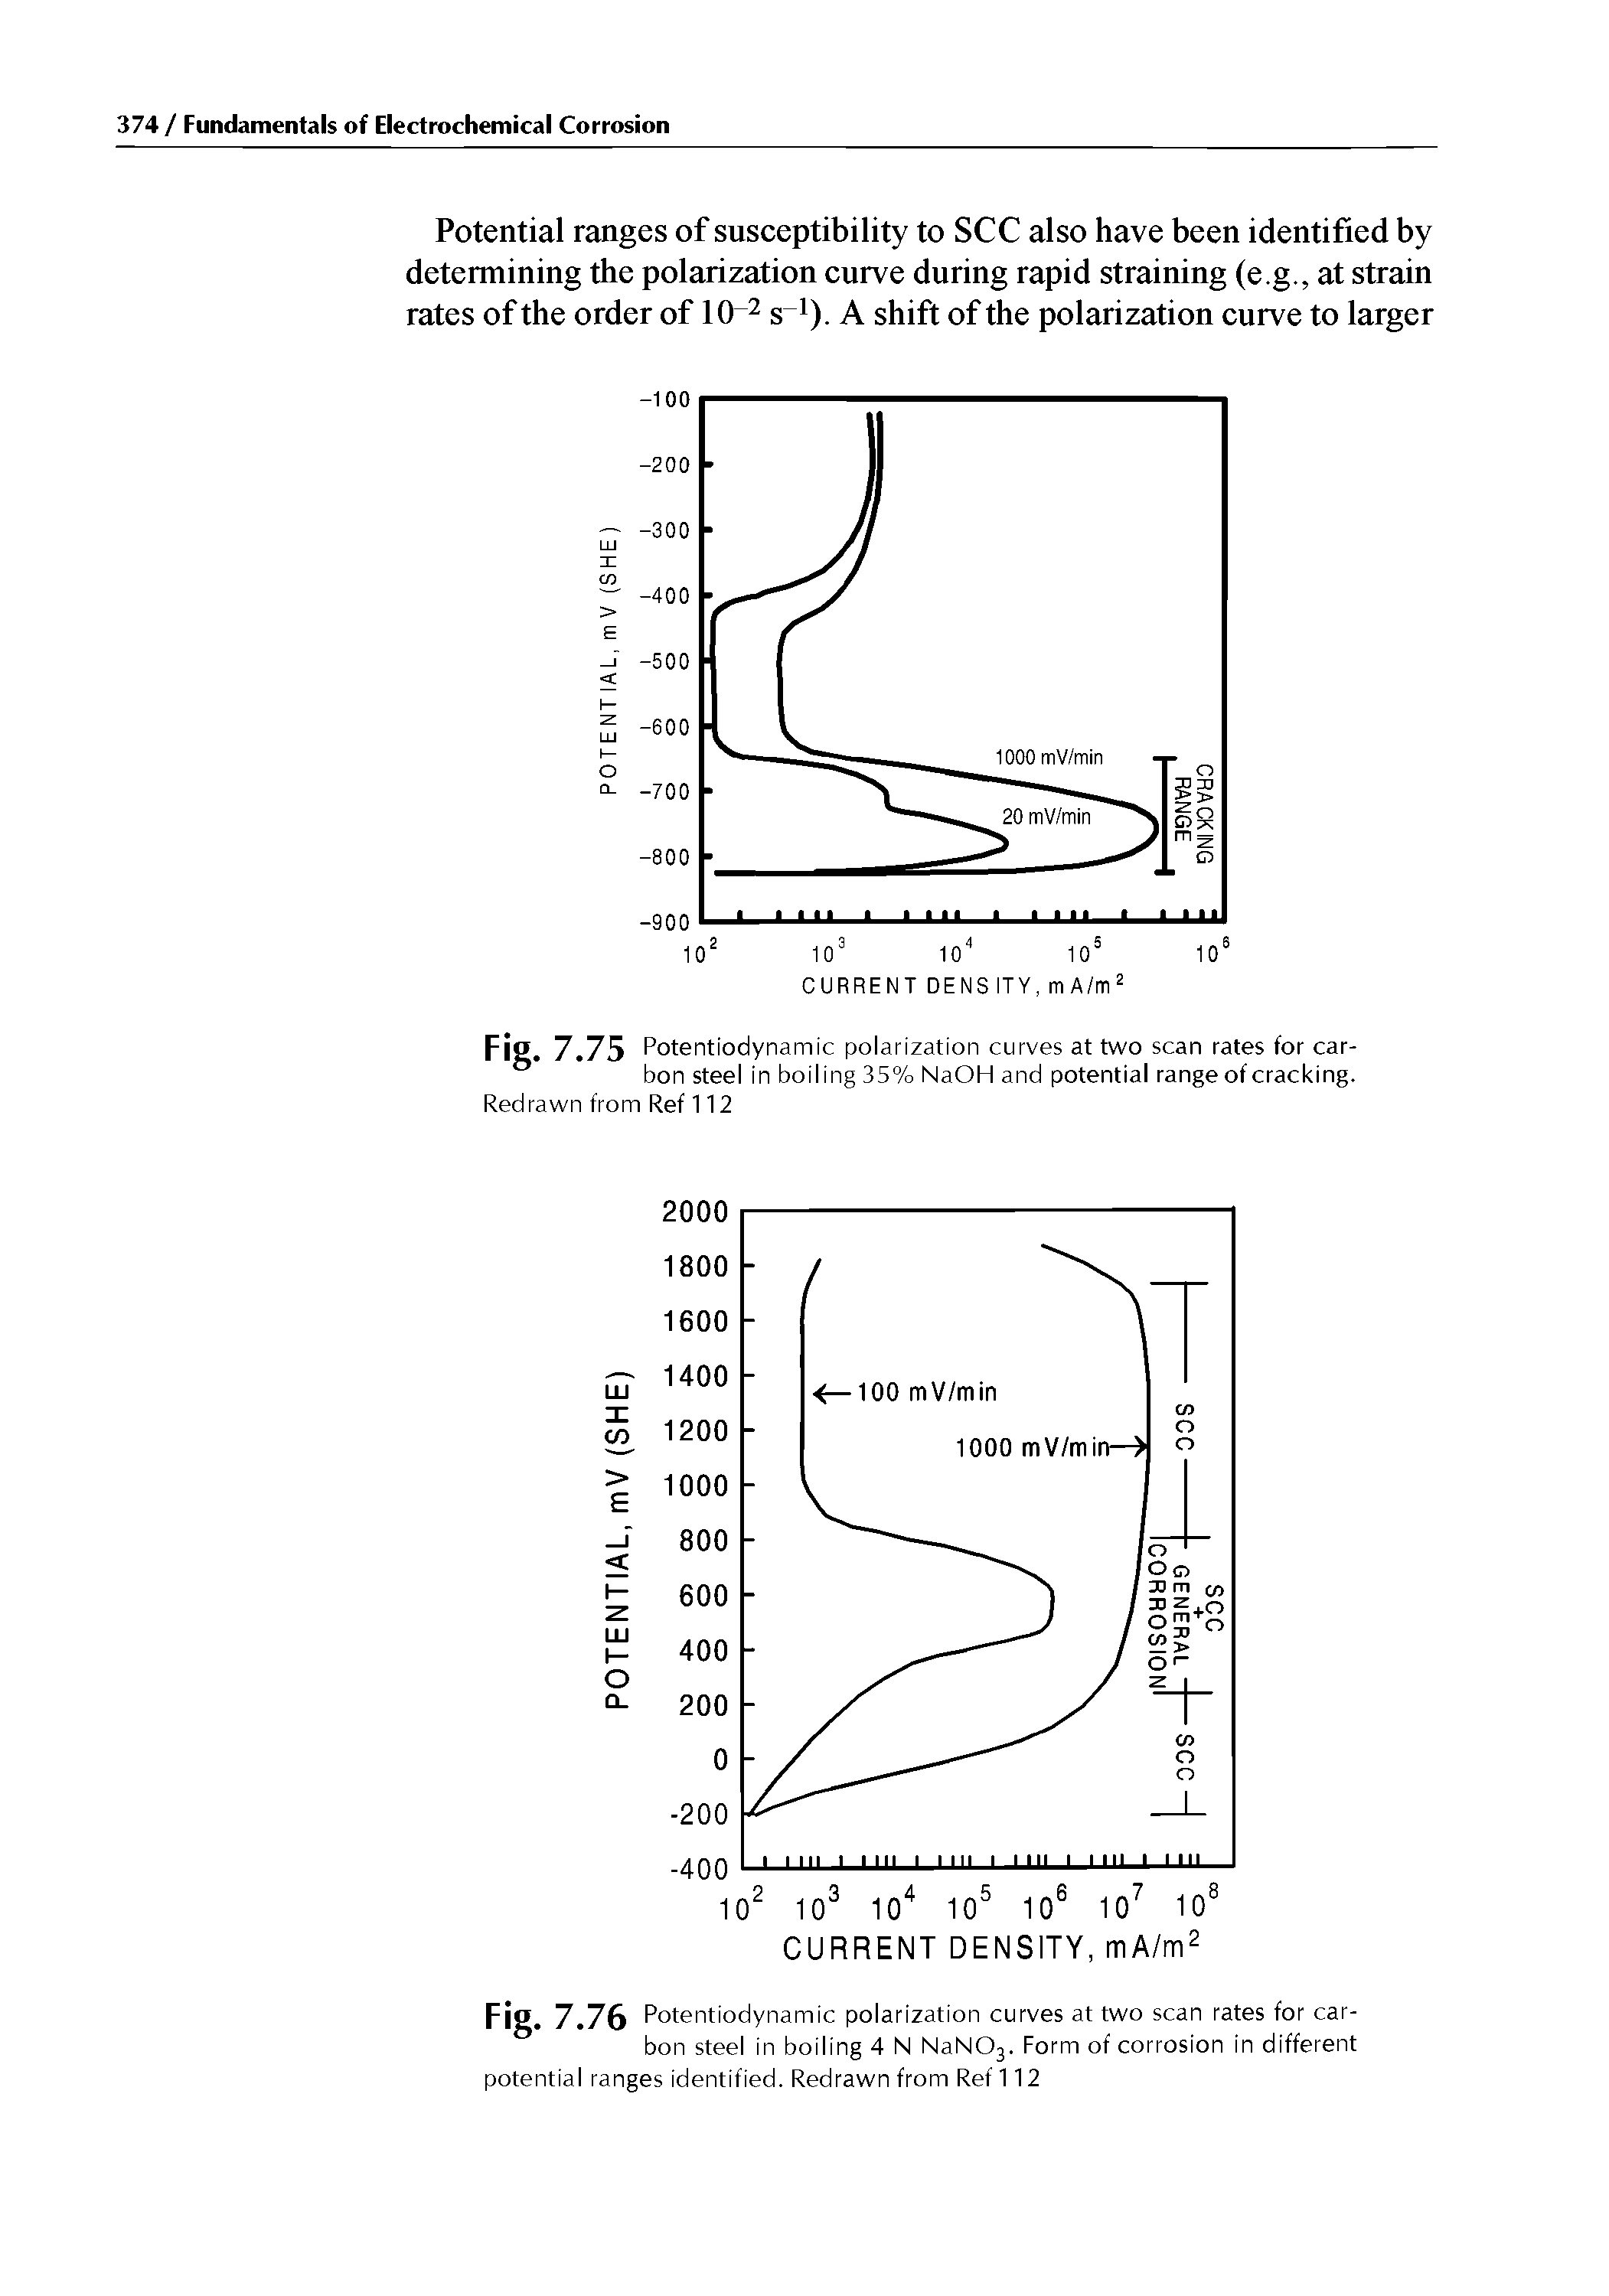 Fig. 7.75 Potentiodynamic polarization curves at two scan rates for carbon steel in boiling 35% NaOH and potential range of cracking. Redrawn from Ref 112...